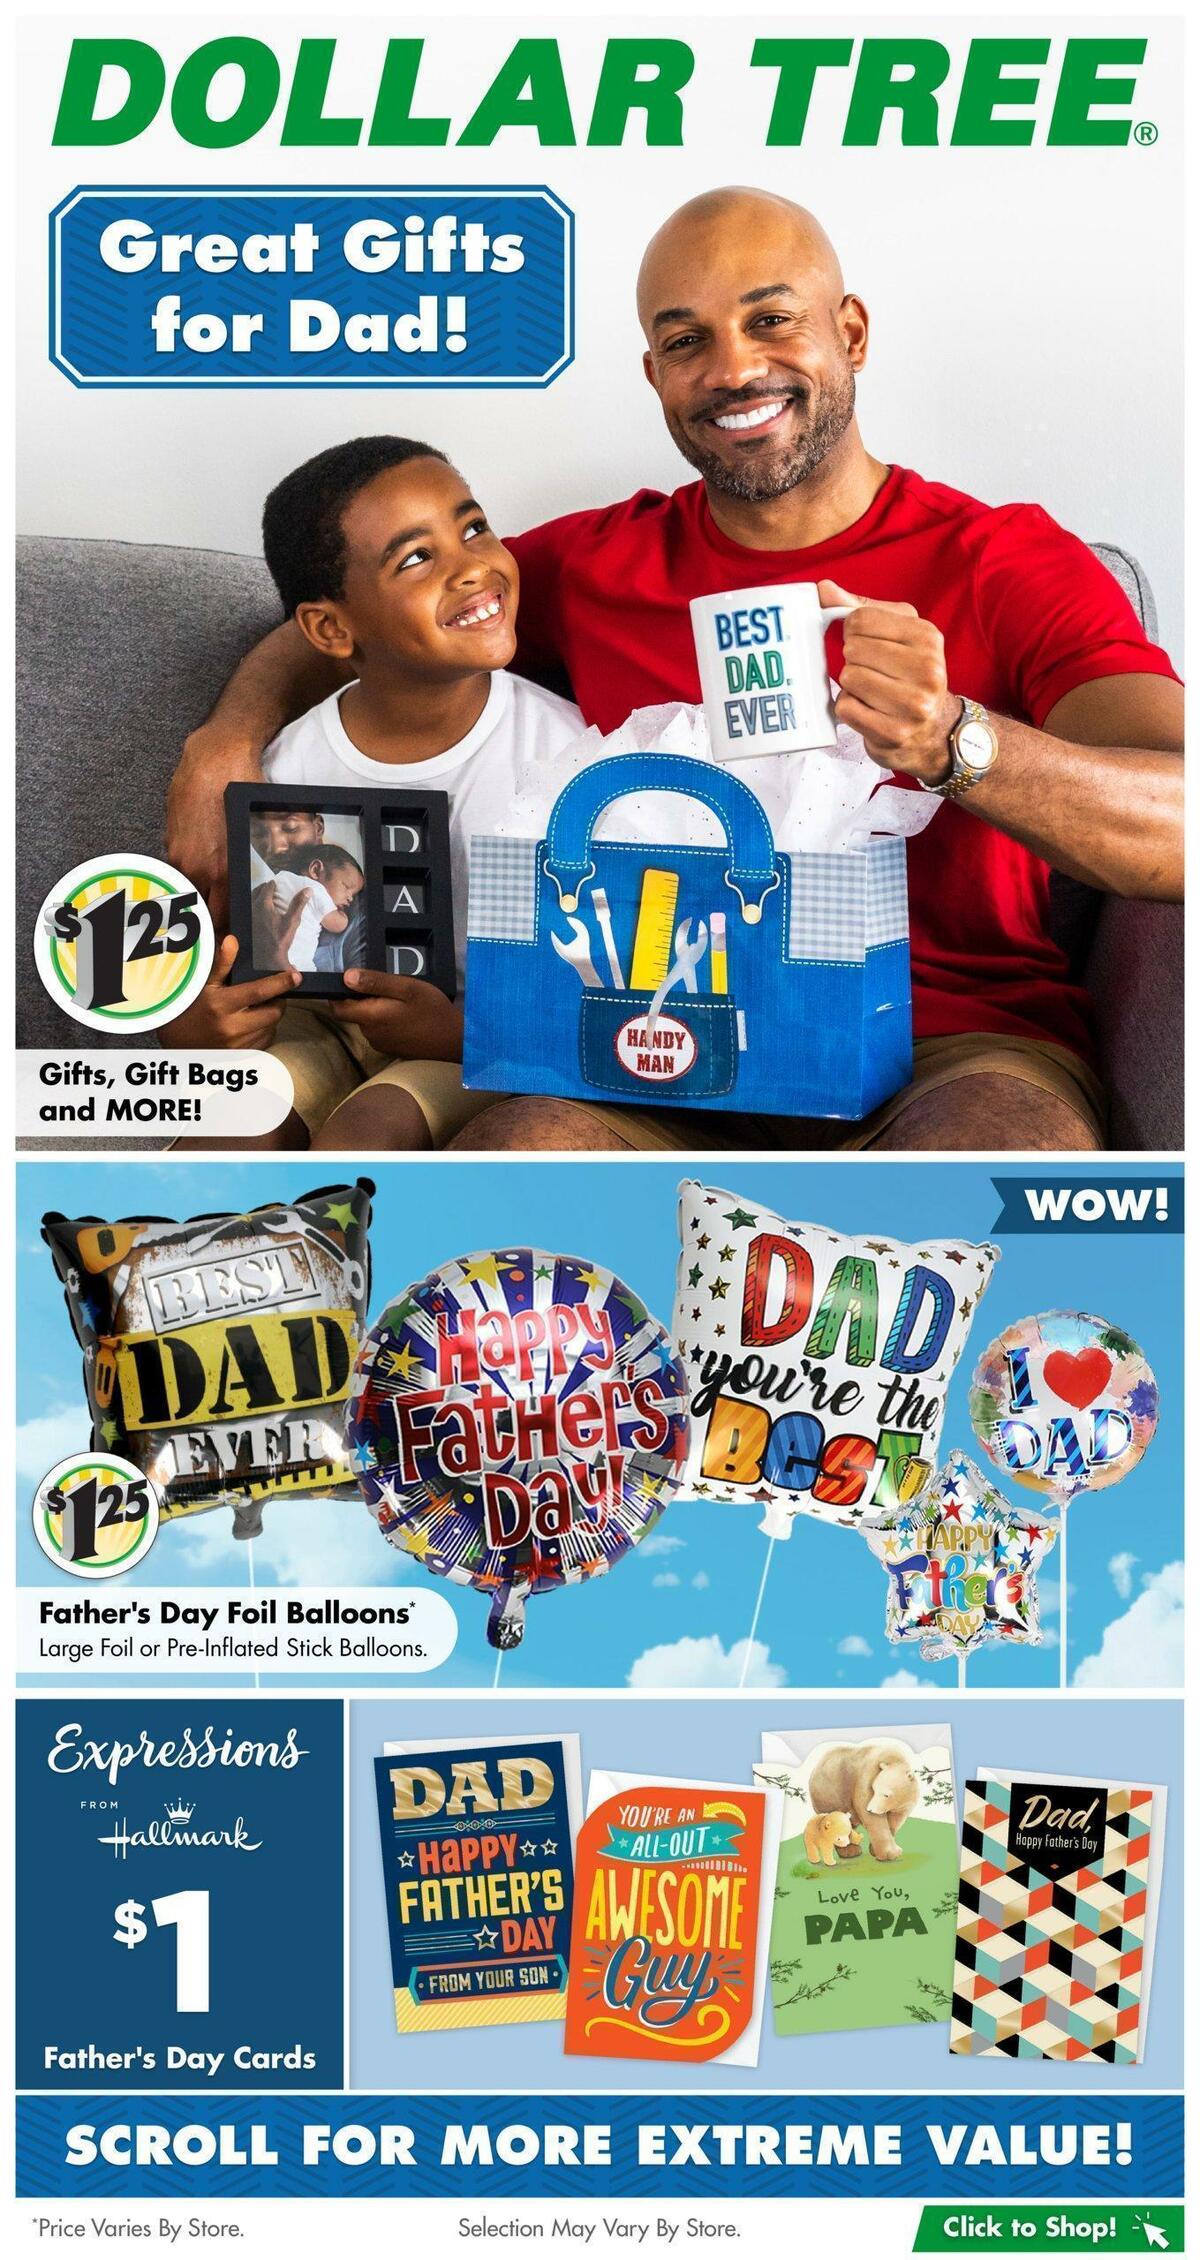 Dollar Tree Weekly Ad from June 11